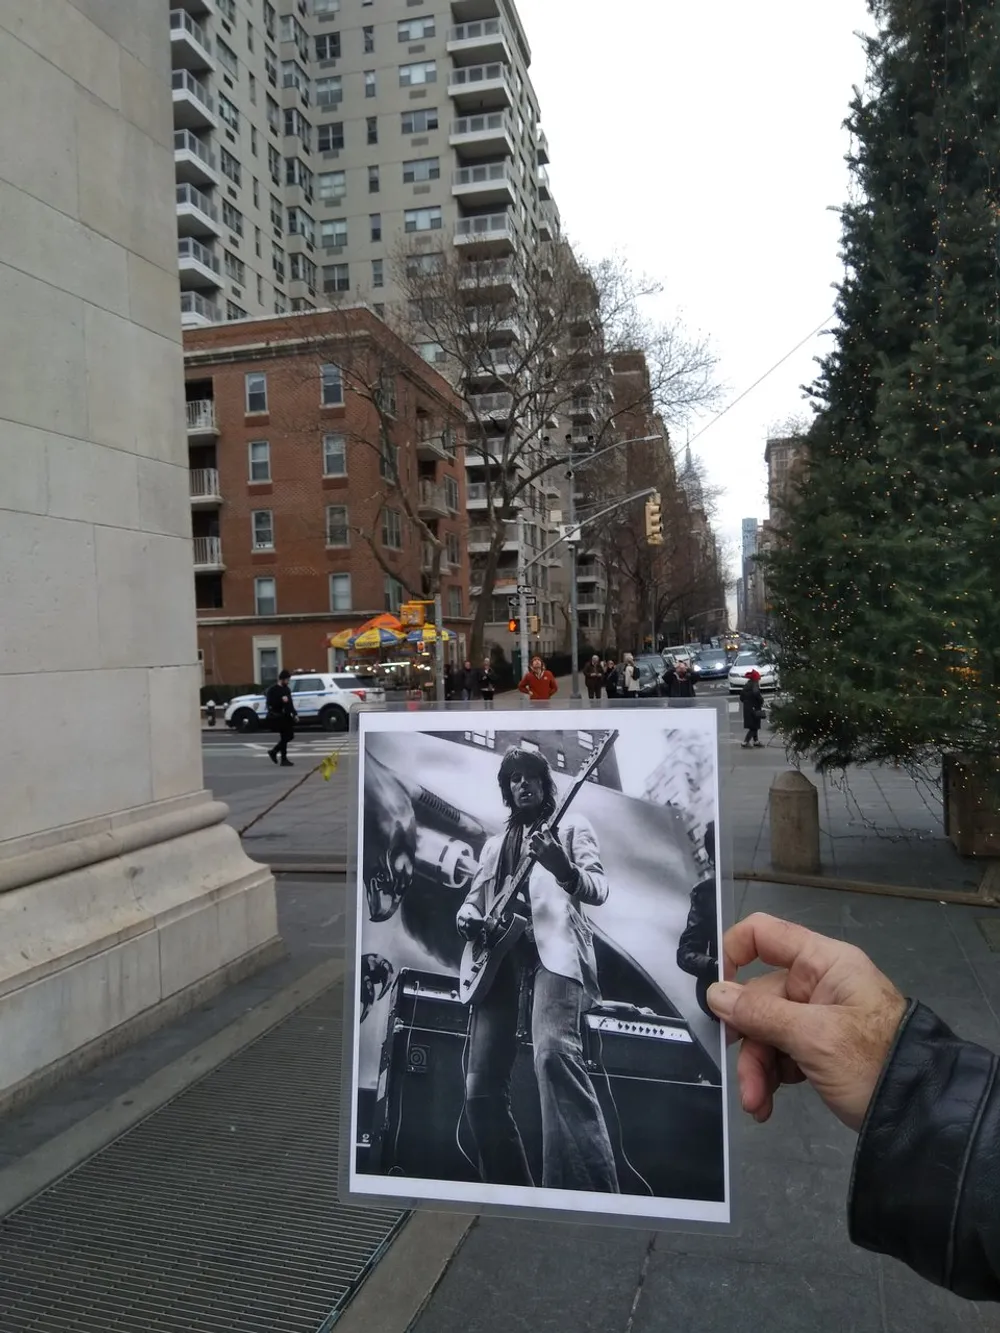 A person is holding up a black and white photograph of a guitarist in an urban setting aligning it creatively with the background street scene